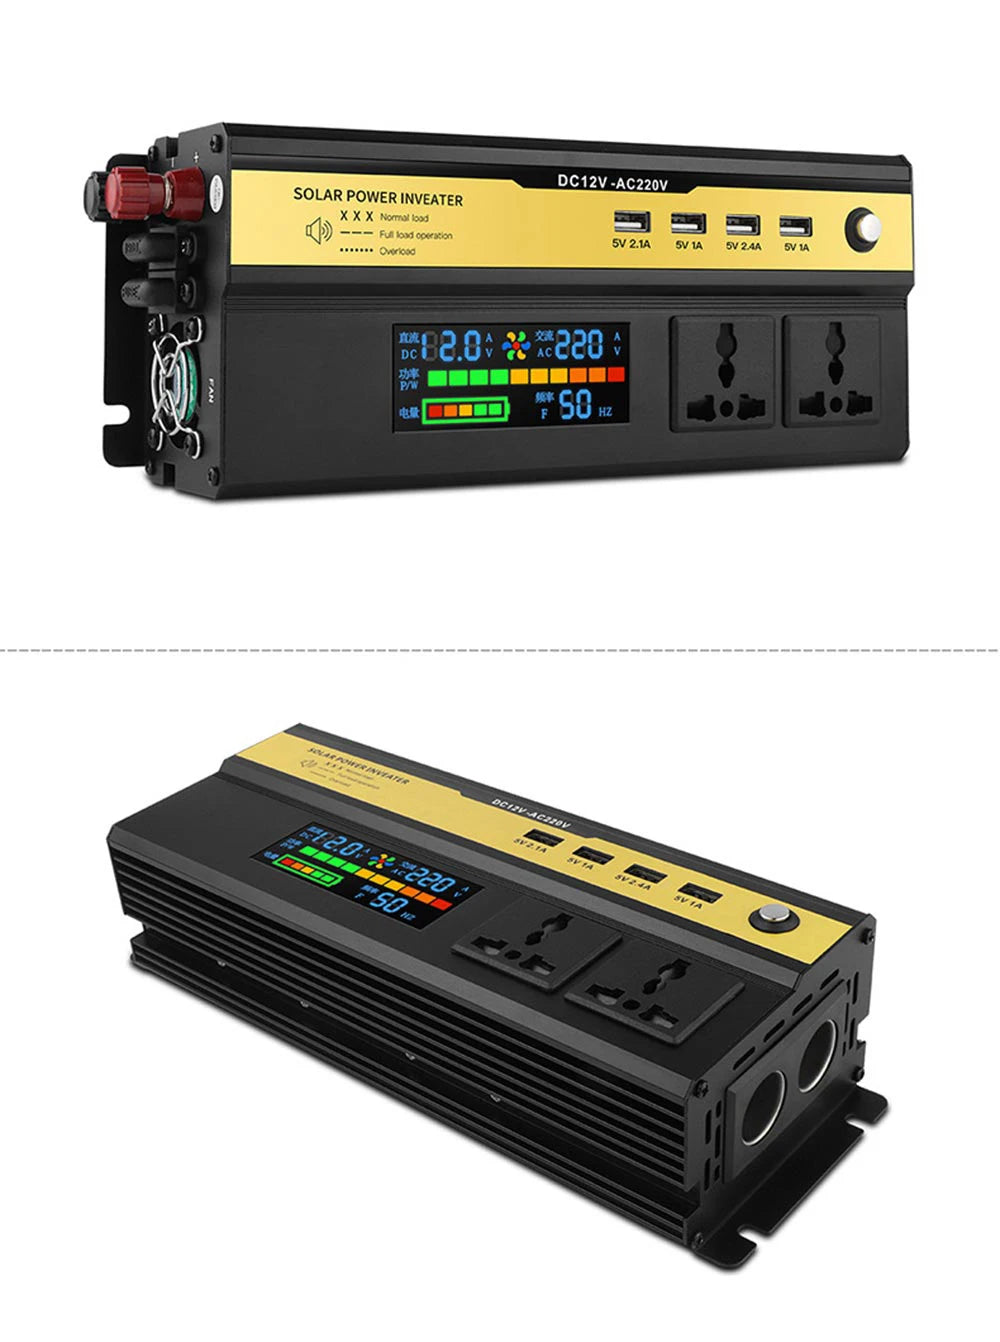 Modified sine wave inverter converts DC 12V to AC 220V with 3000-6000W output power and various safety features.